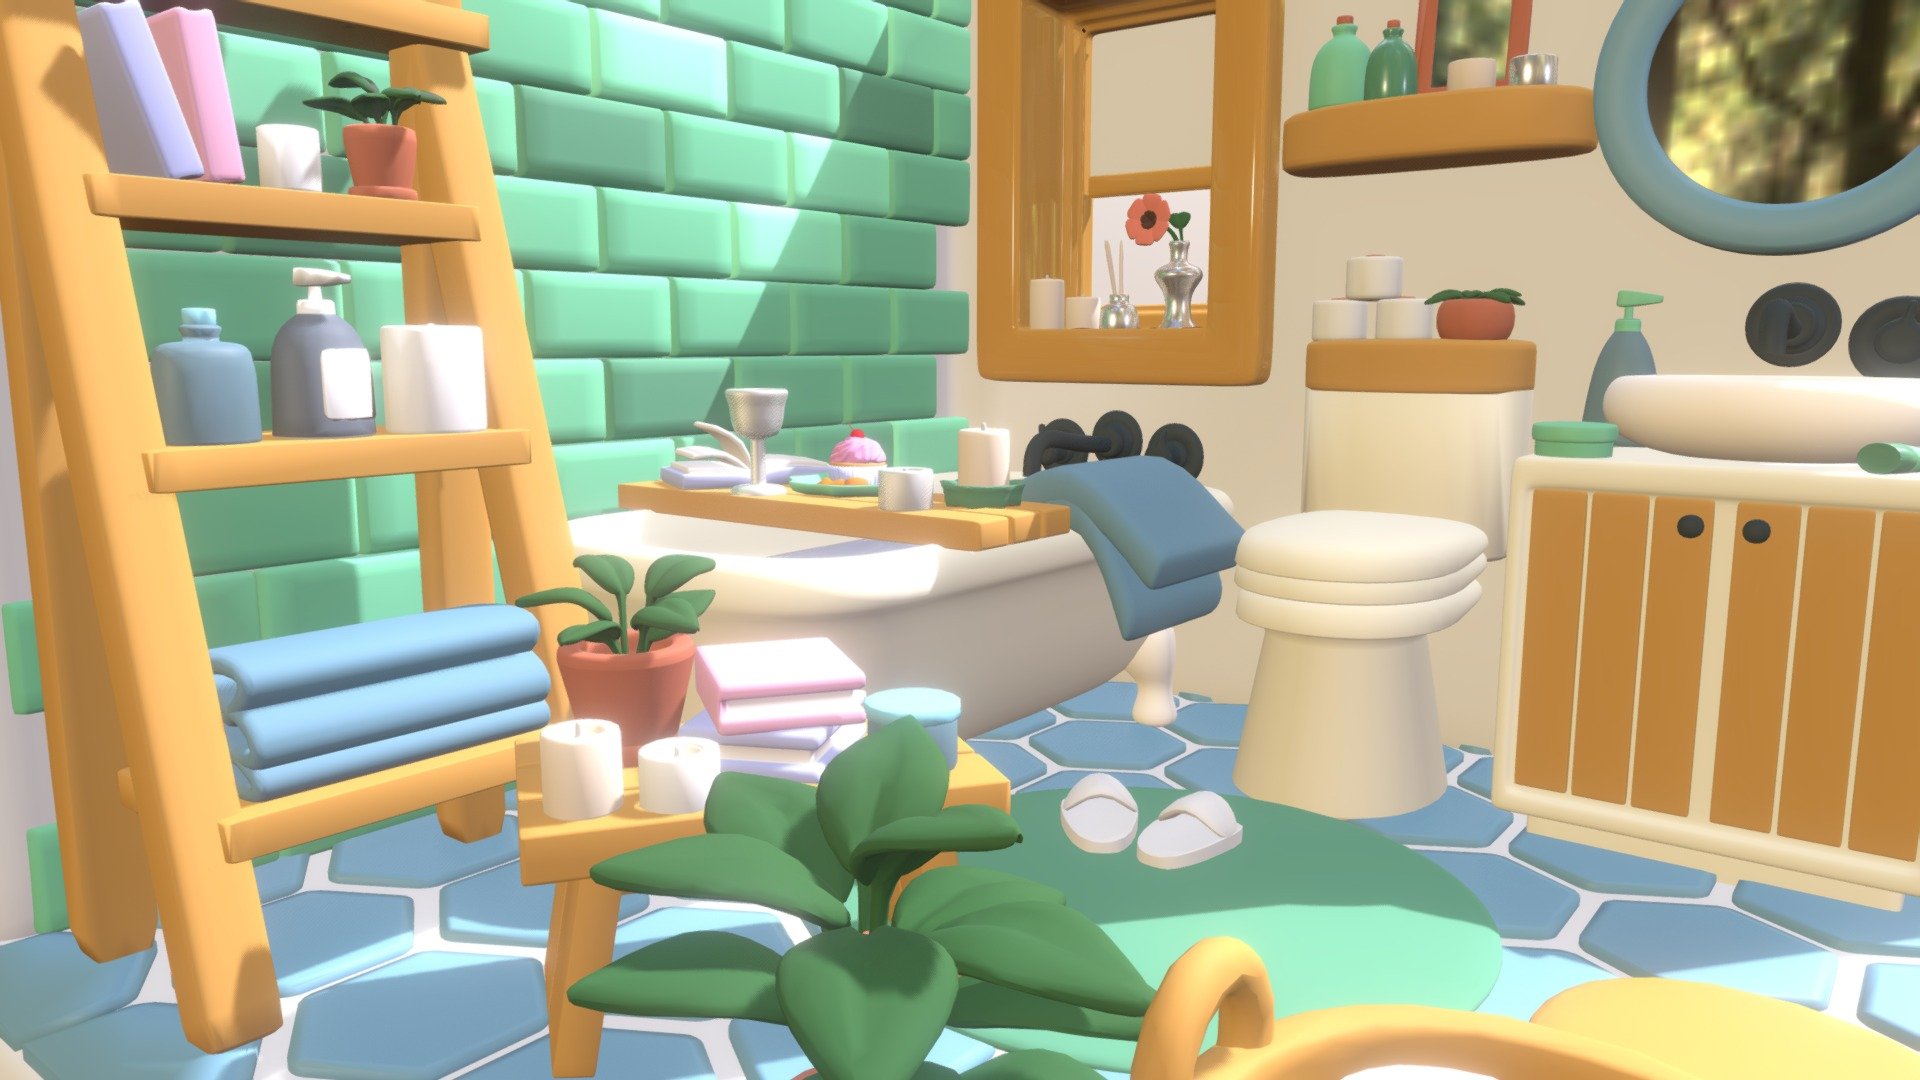 Made in Blender 3.2 | Low-poly room | Ready for Unity - Isometric Bathroom - 3D model by mtereckhovaa 3d model